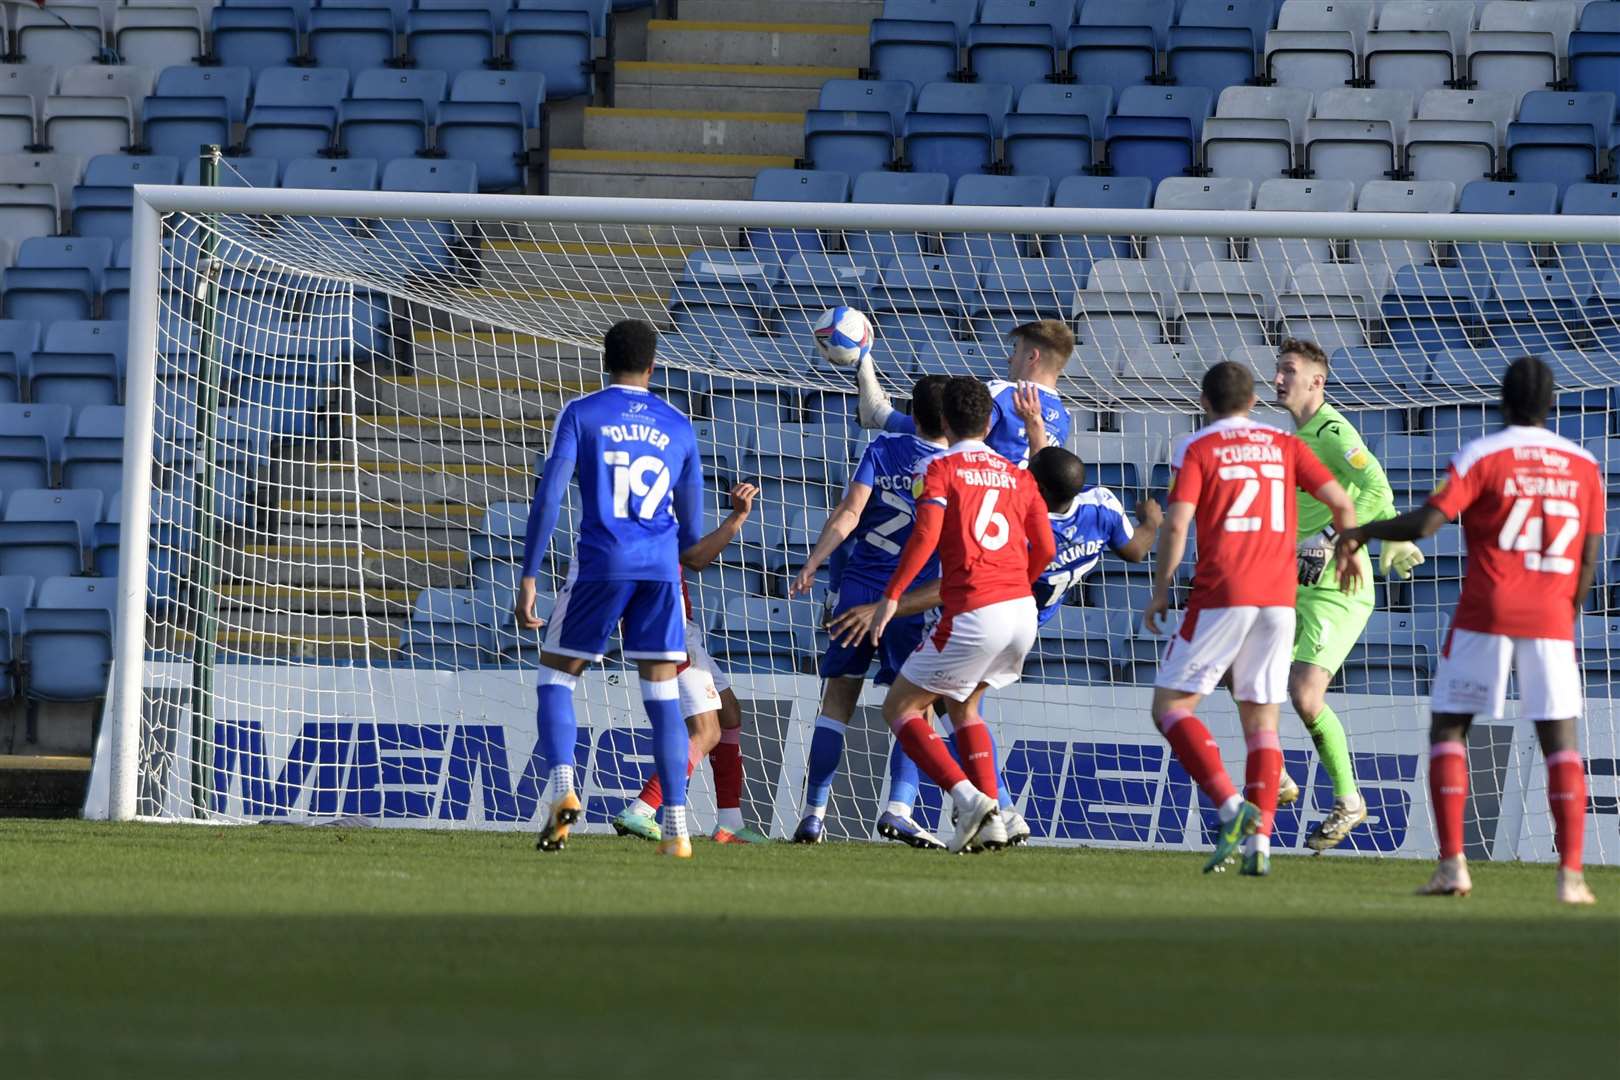 Gillingham clear the danger as Swindon threaten the goal Picture: Barry Goodwin